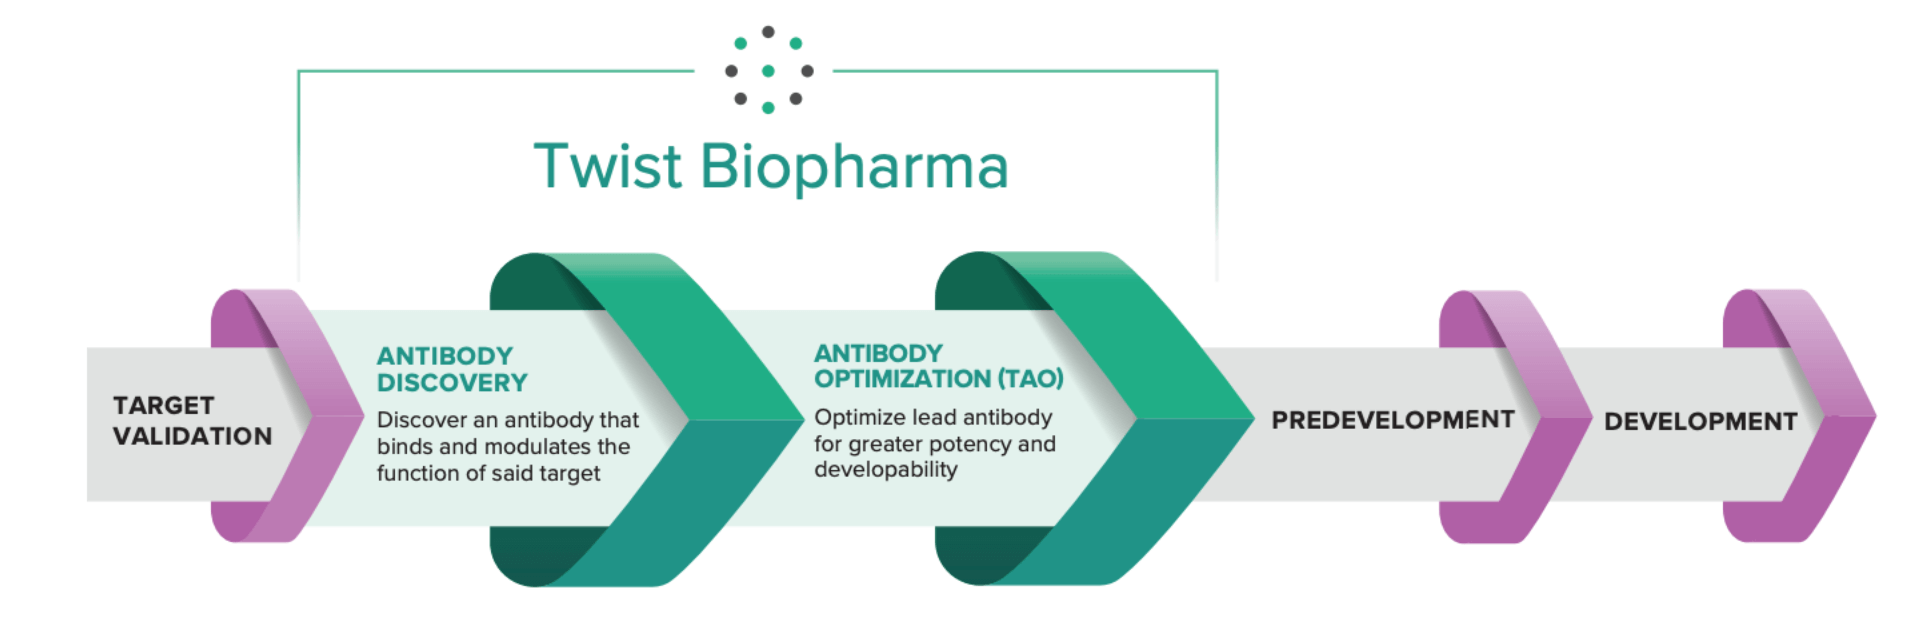 Diagram showing TwistBiopharma's role in the therapeutic antibody development pipeline.